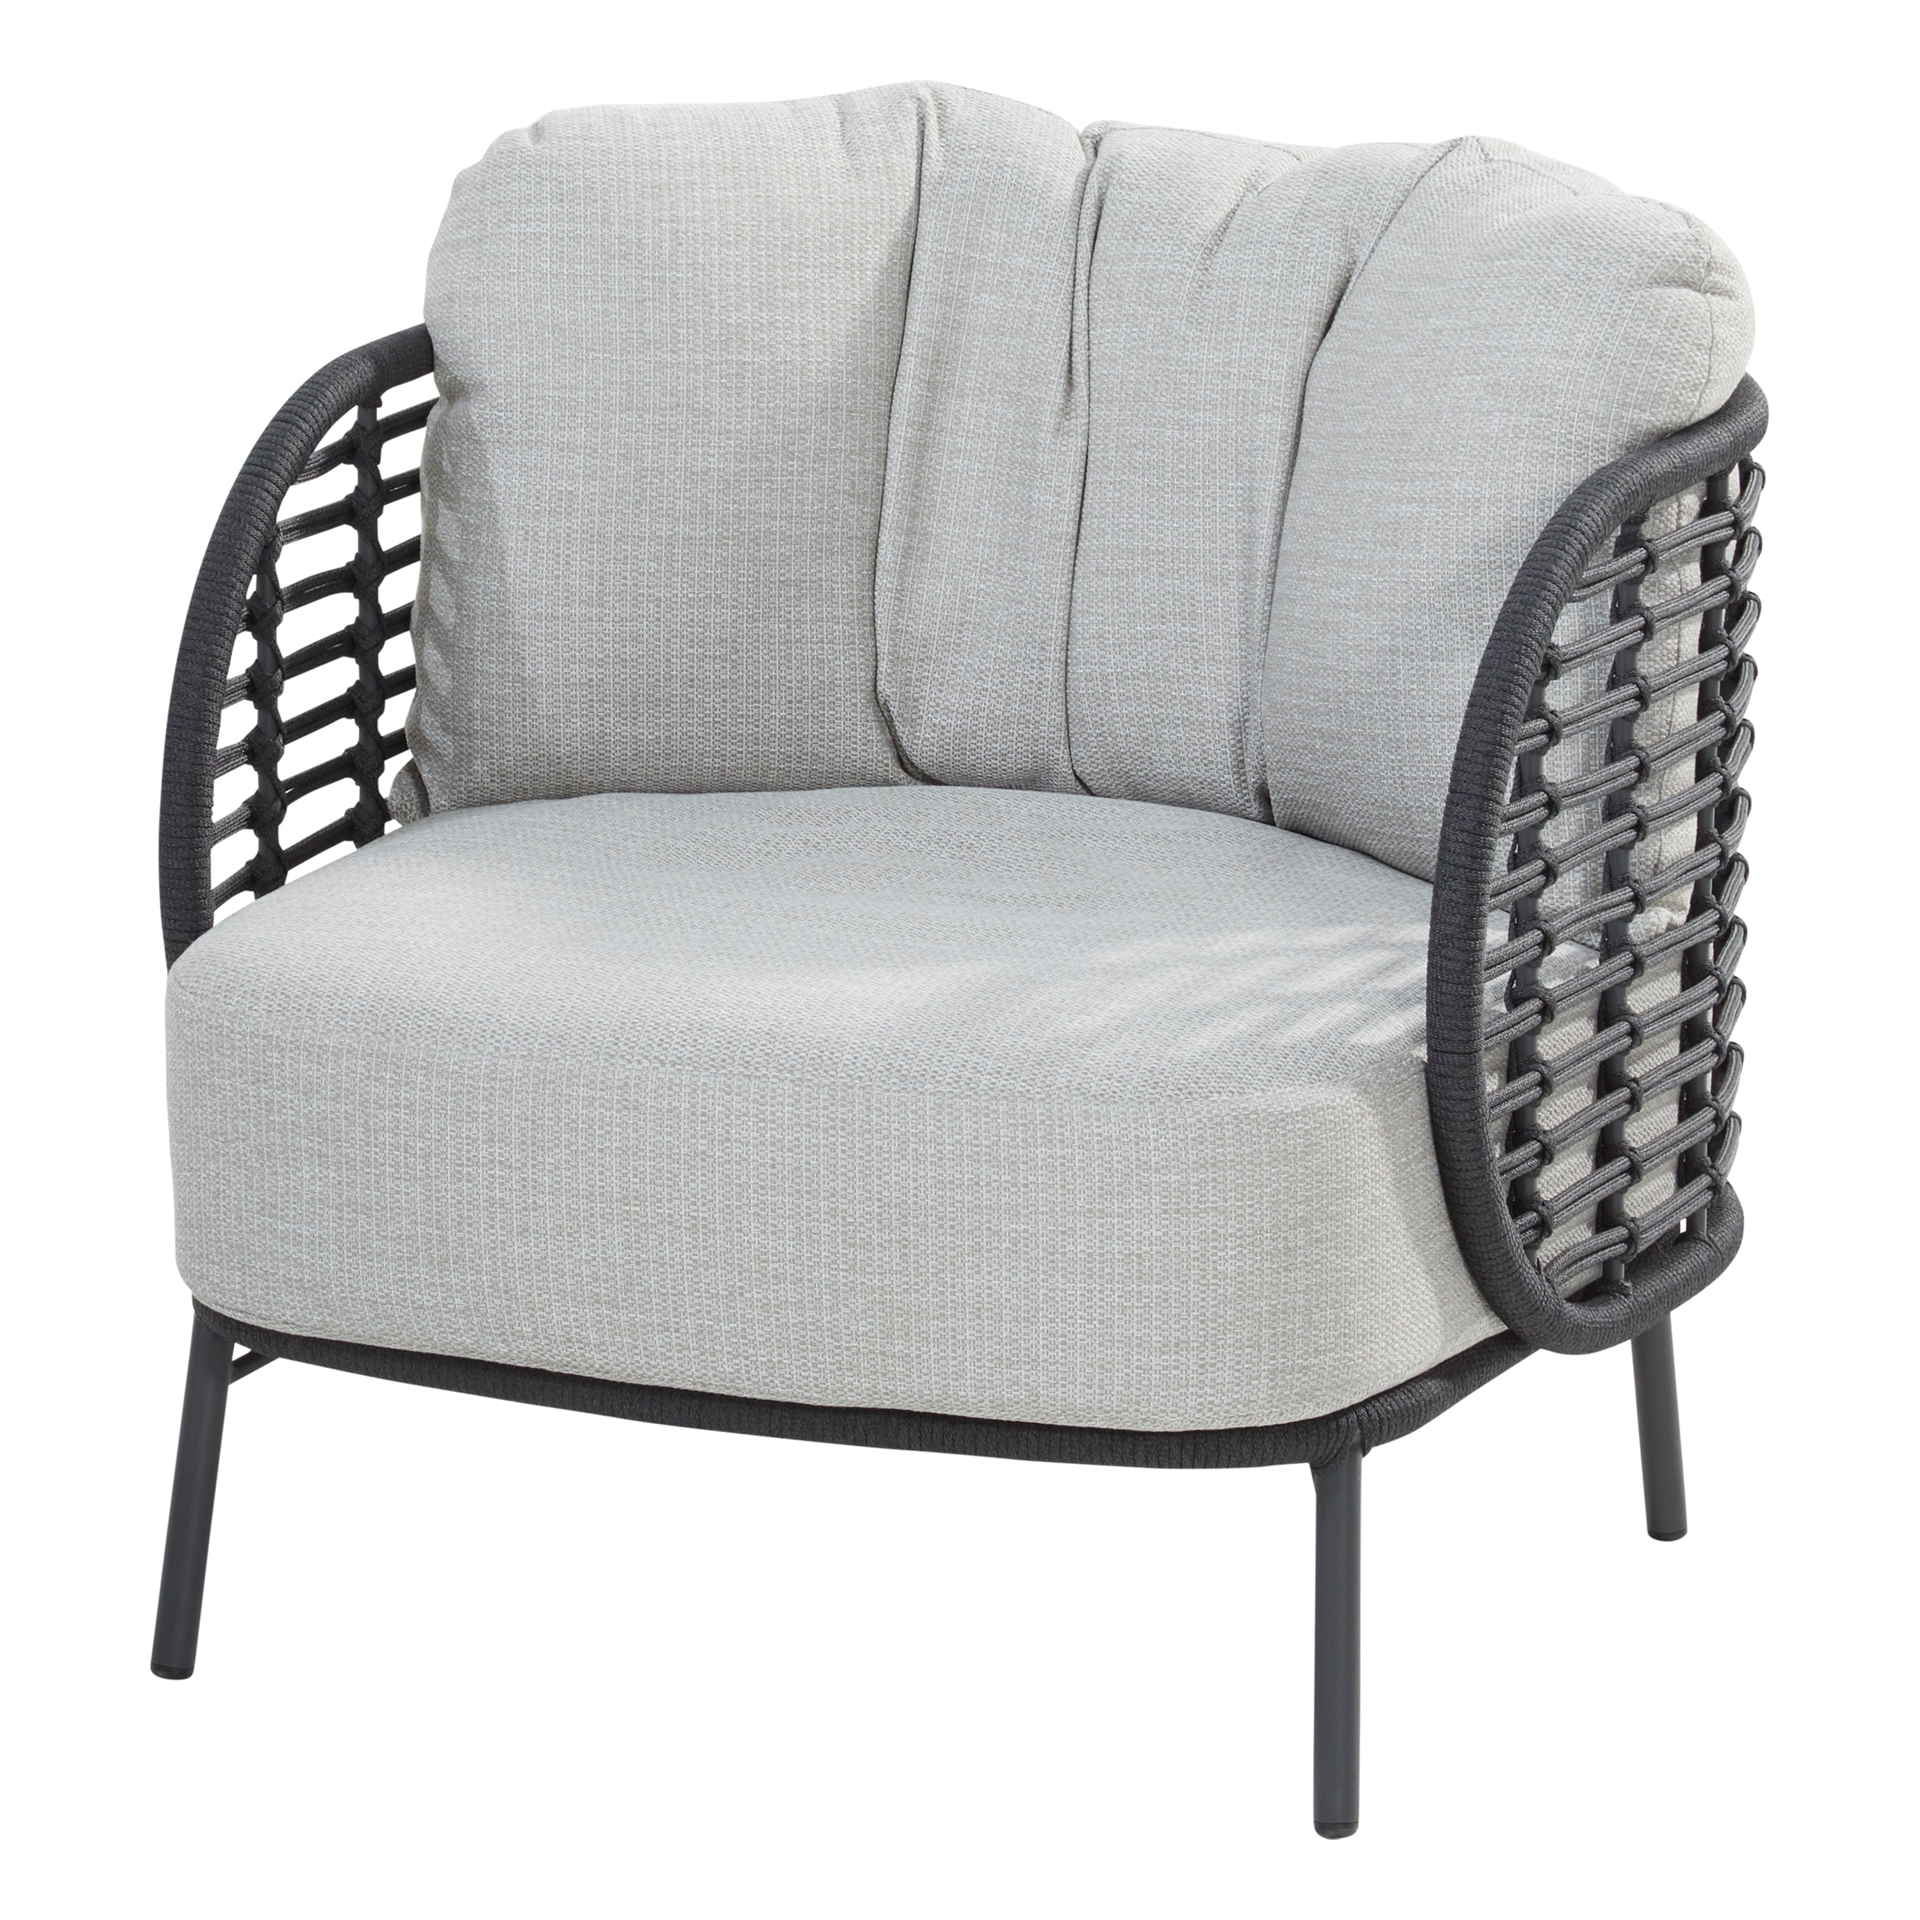 Fabrice Living Chair with 2 cushions 